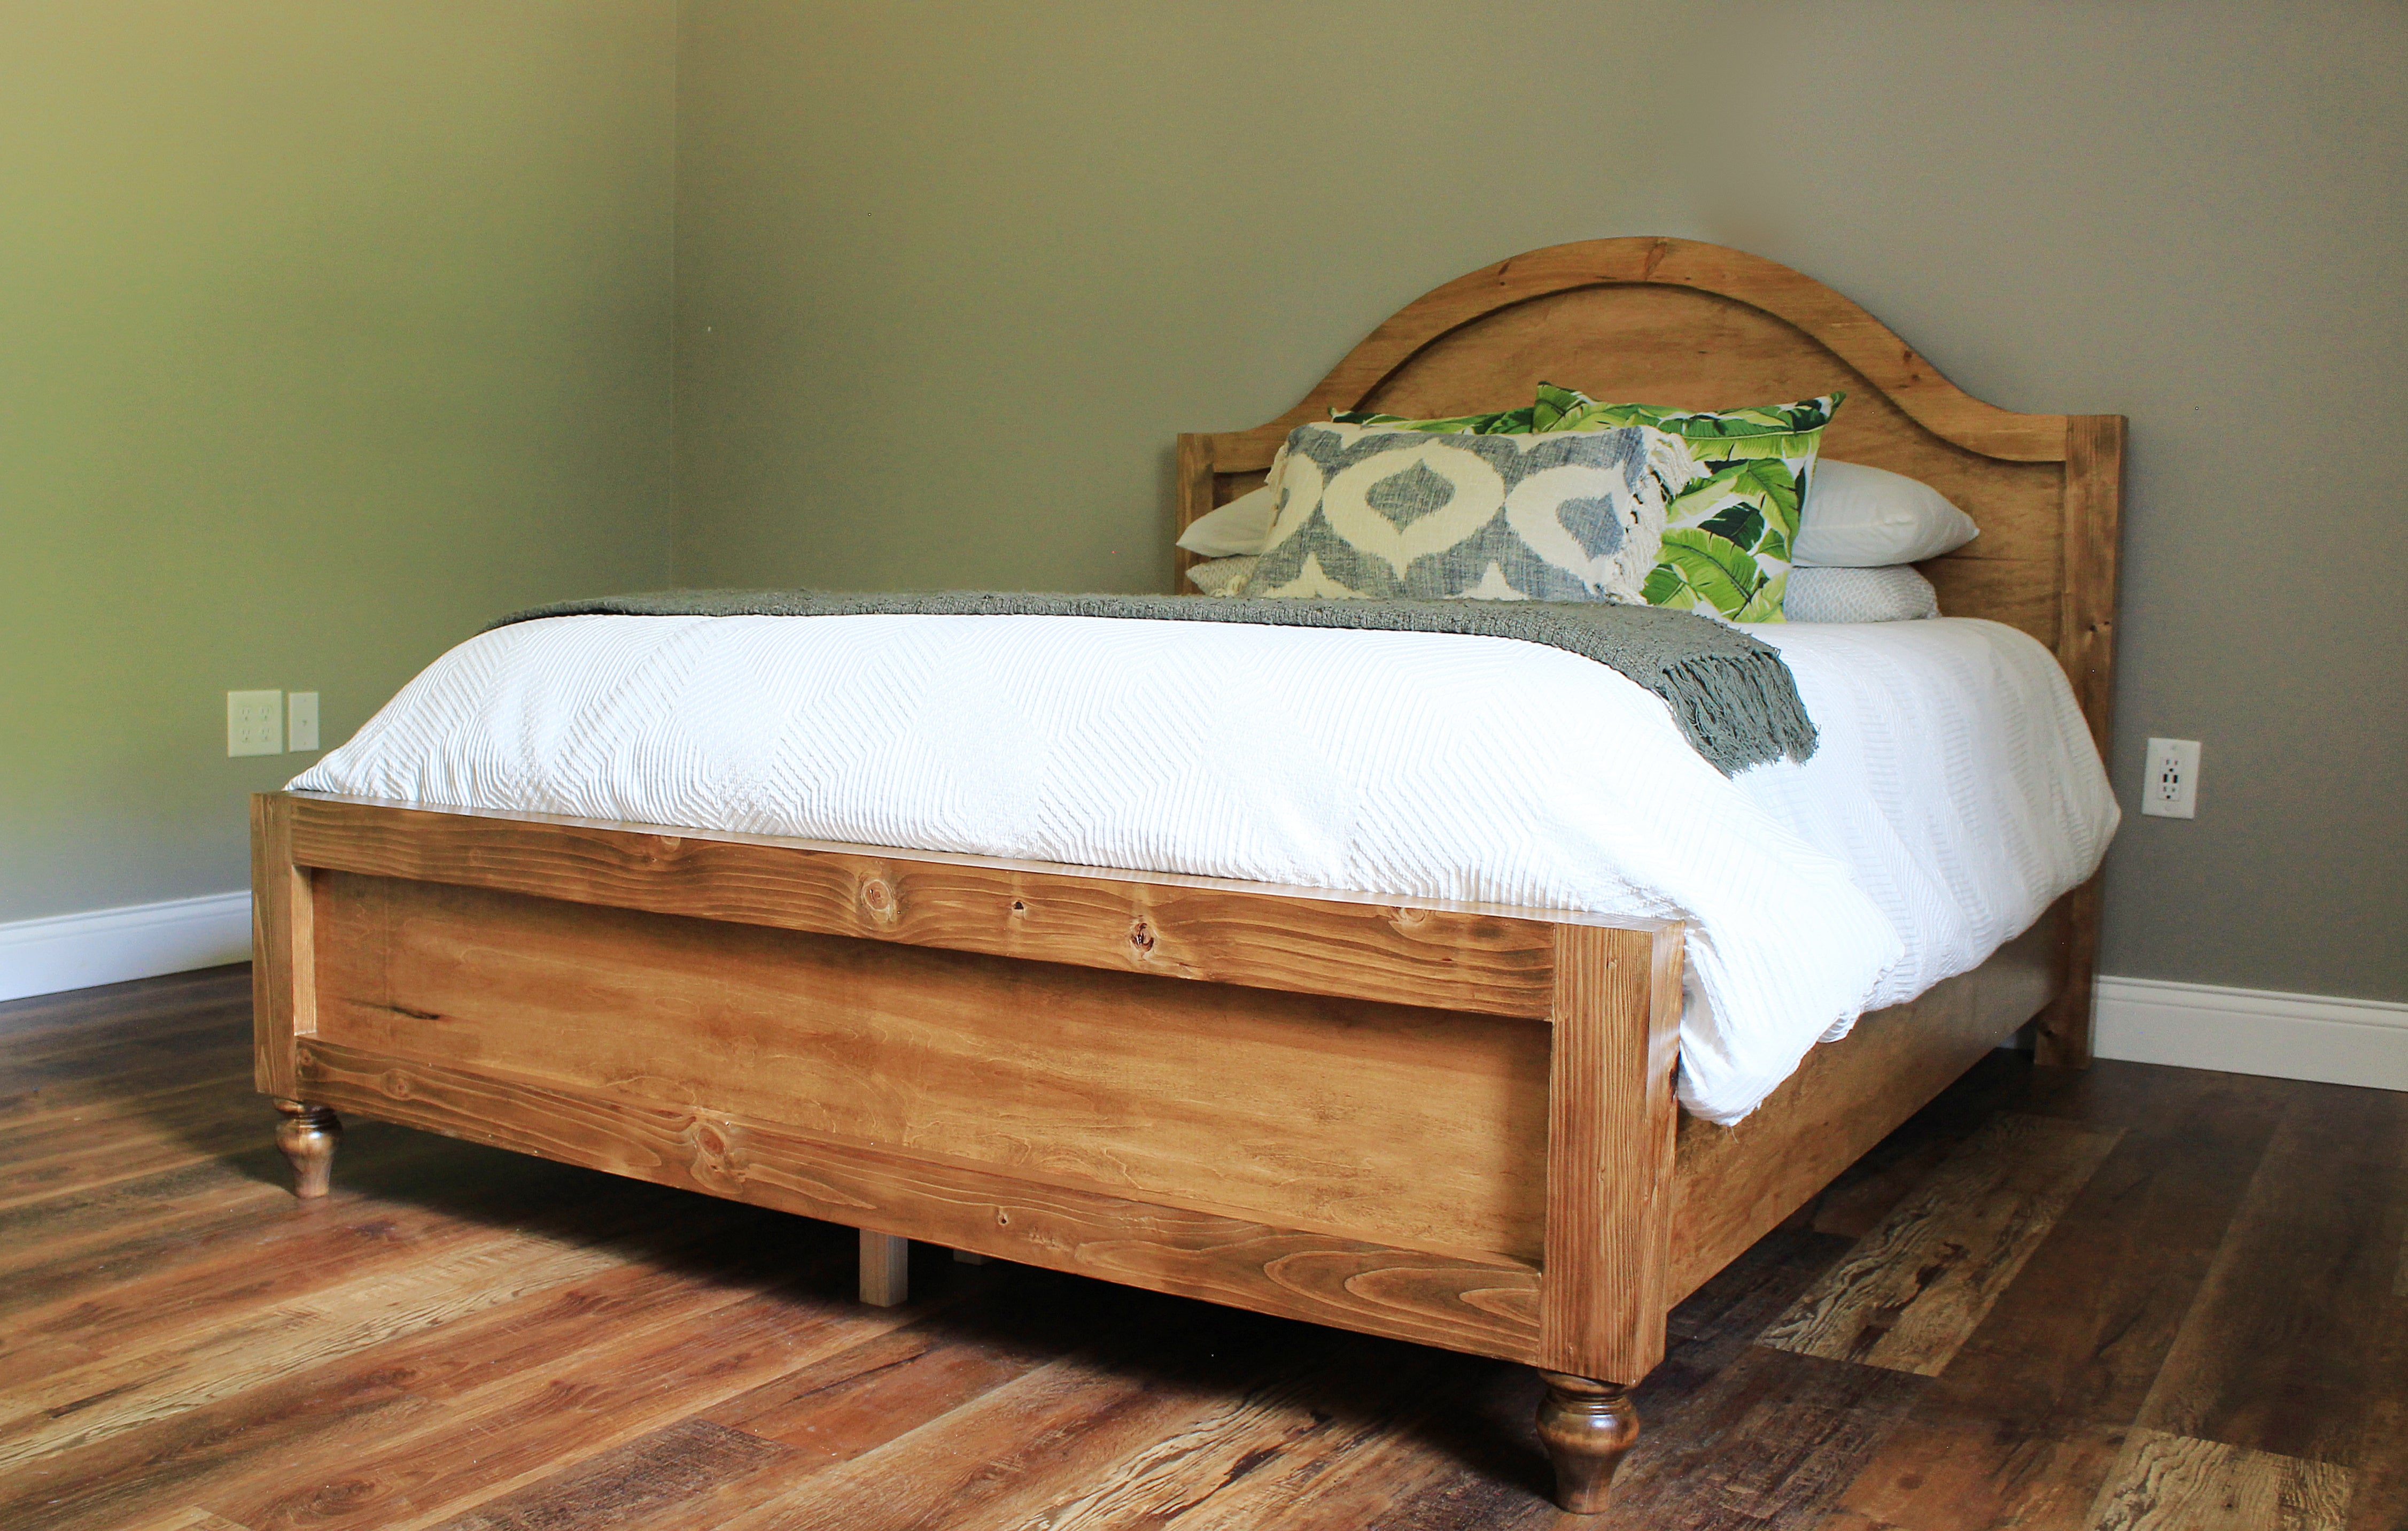 Modern Bed with Arched Head Board